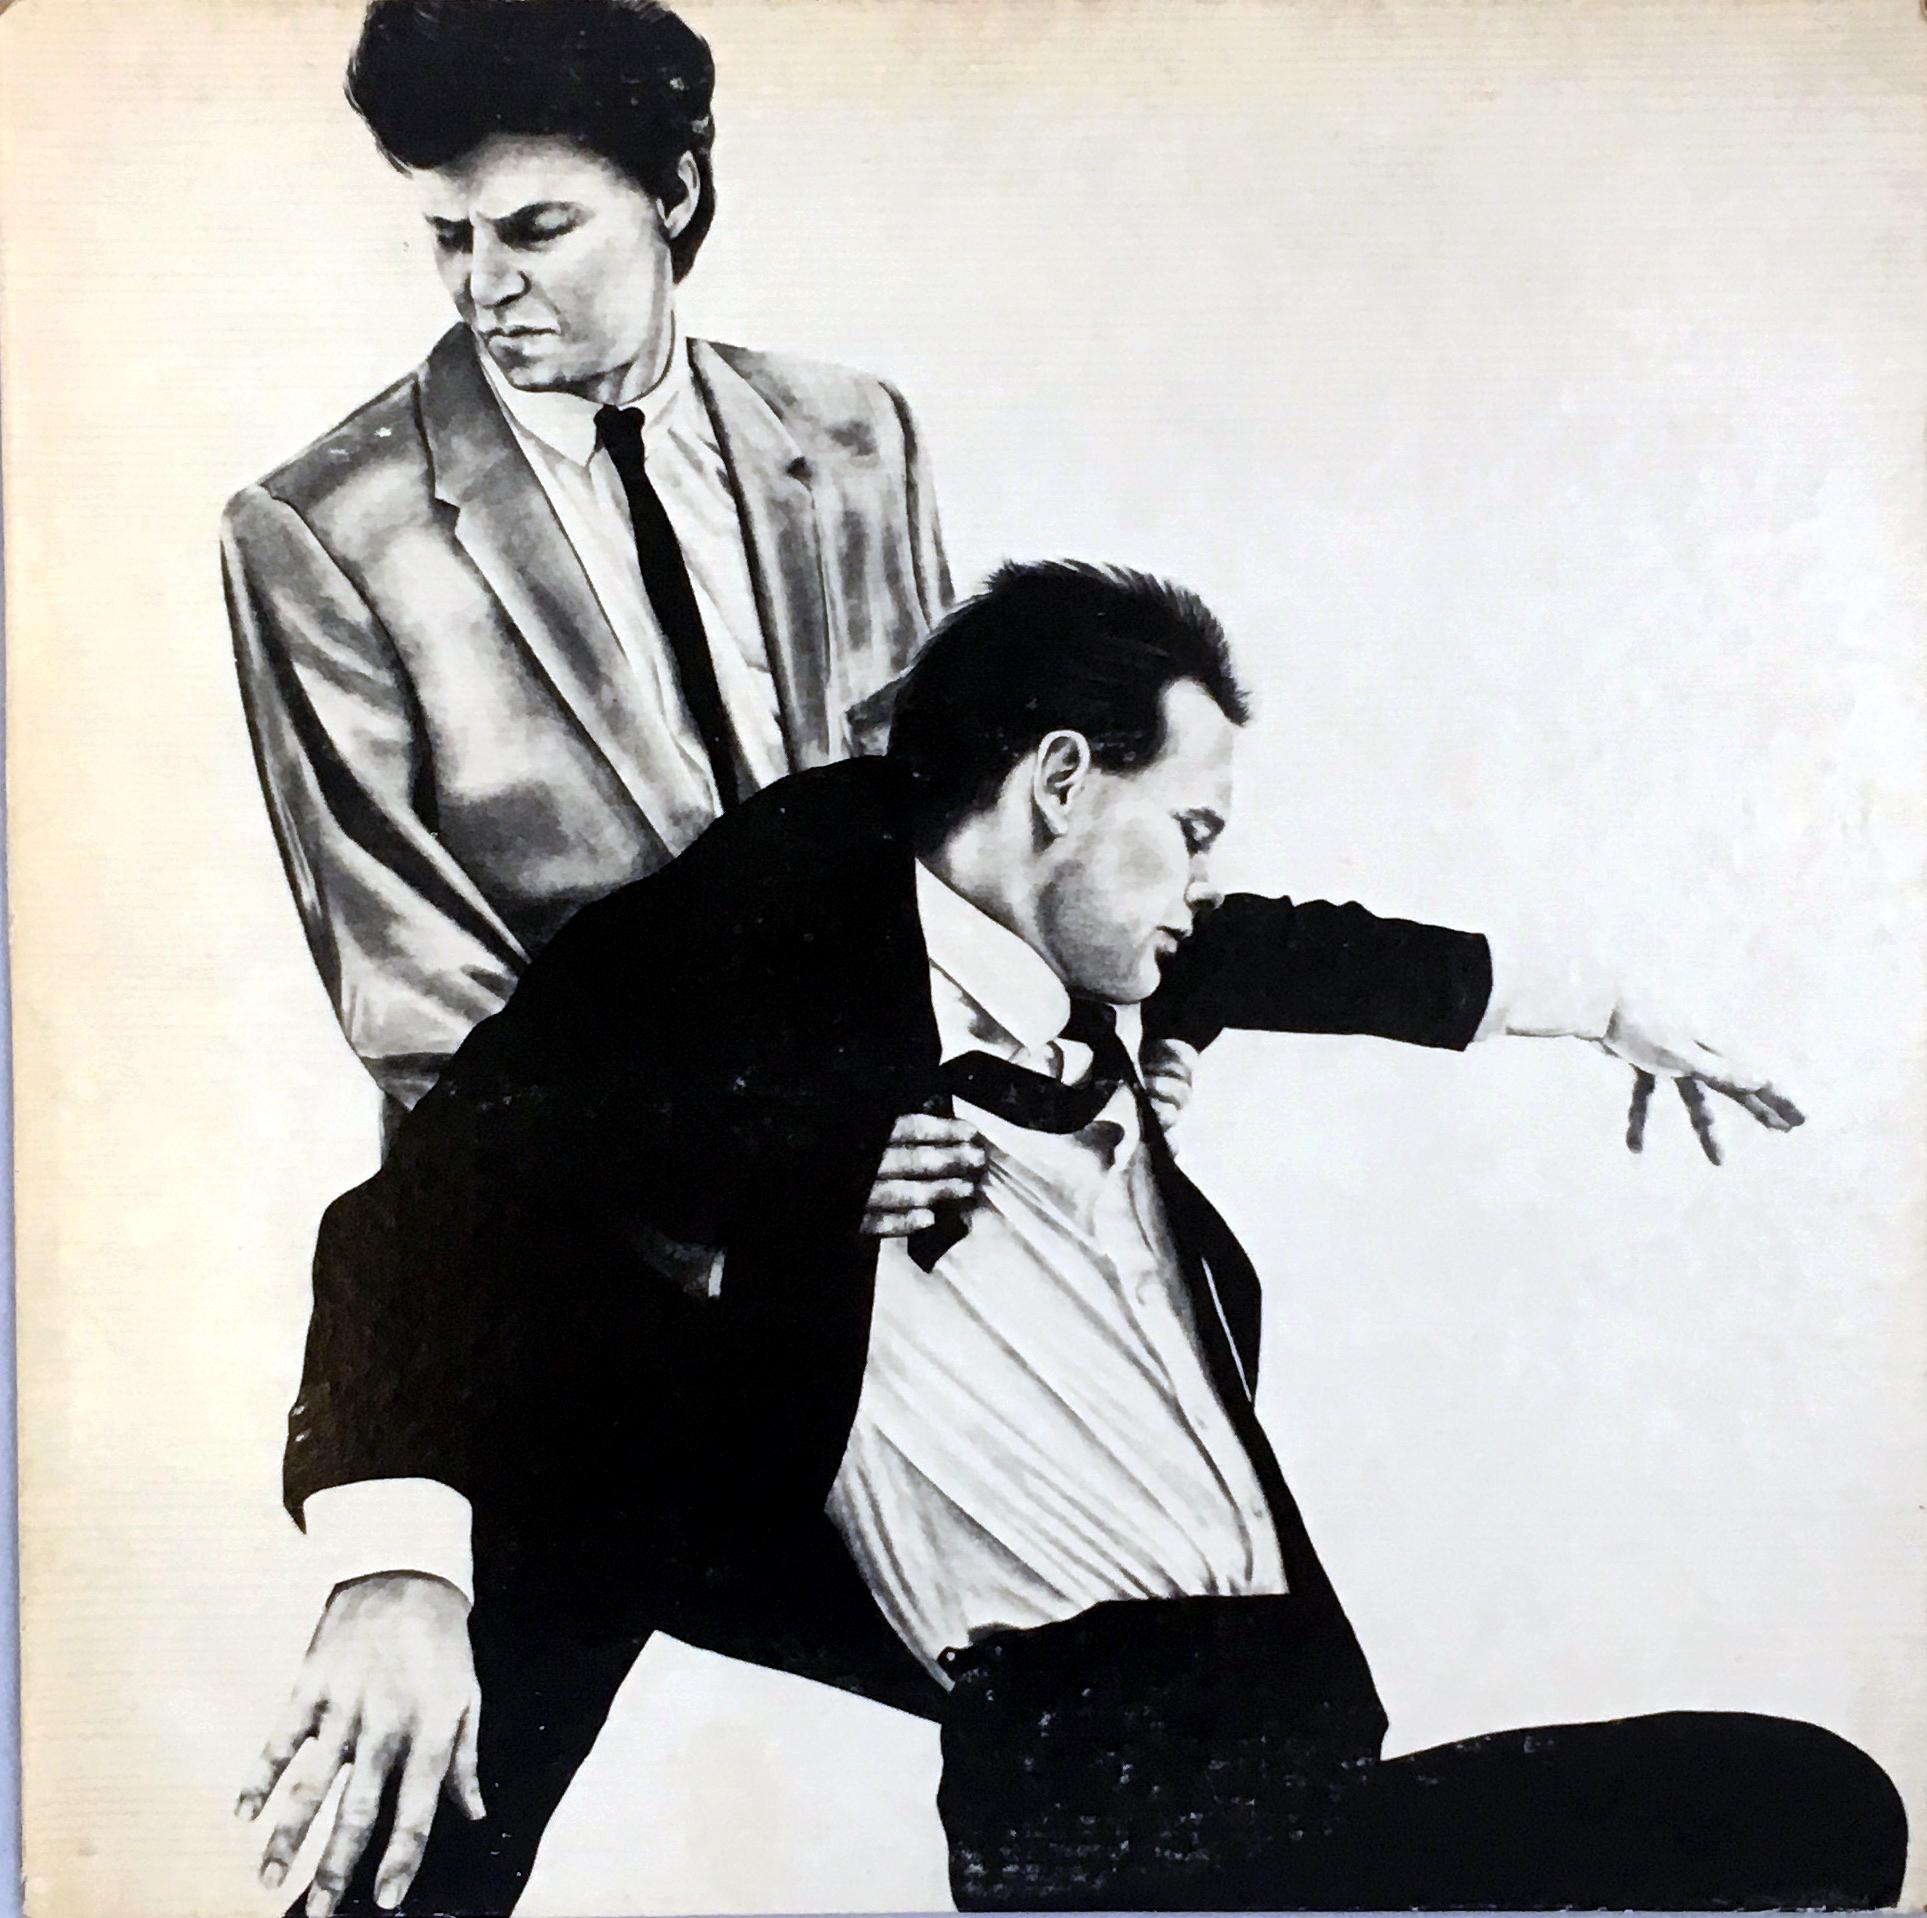 Glenn Branca ‎– The Ascension: A Rare Highly Sought After Vinyl Art Cover featuring Original Artwork by Robert Longo from his classic "Men in the Cities" series. 

Year: 1981

Medium: Offset Lithograph on vinyl record cover 

Dimensions: 12 x 12